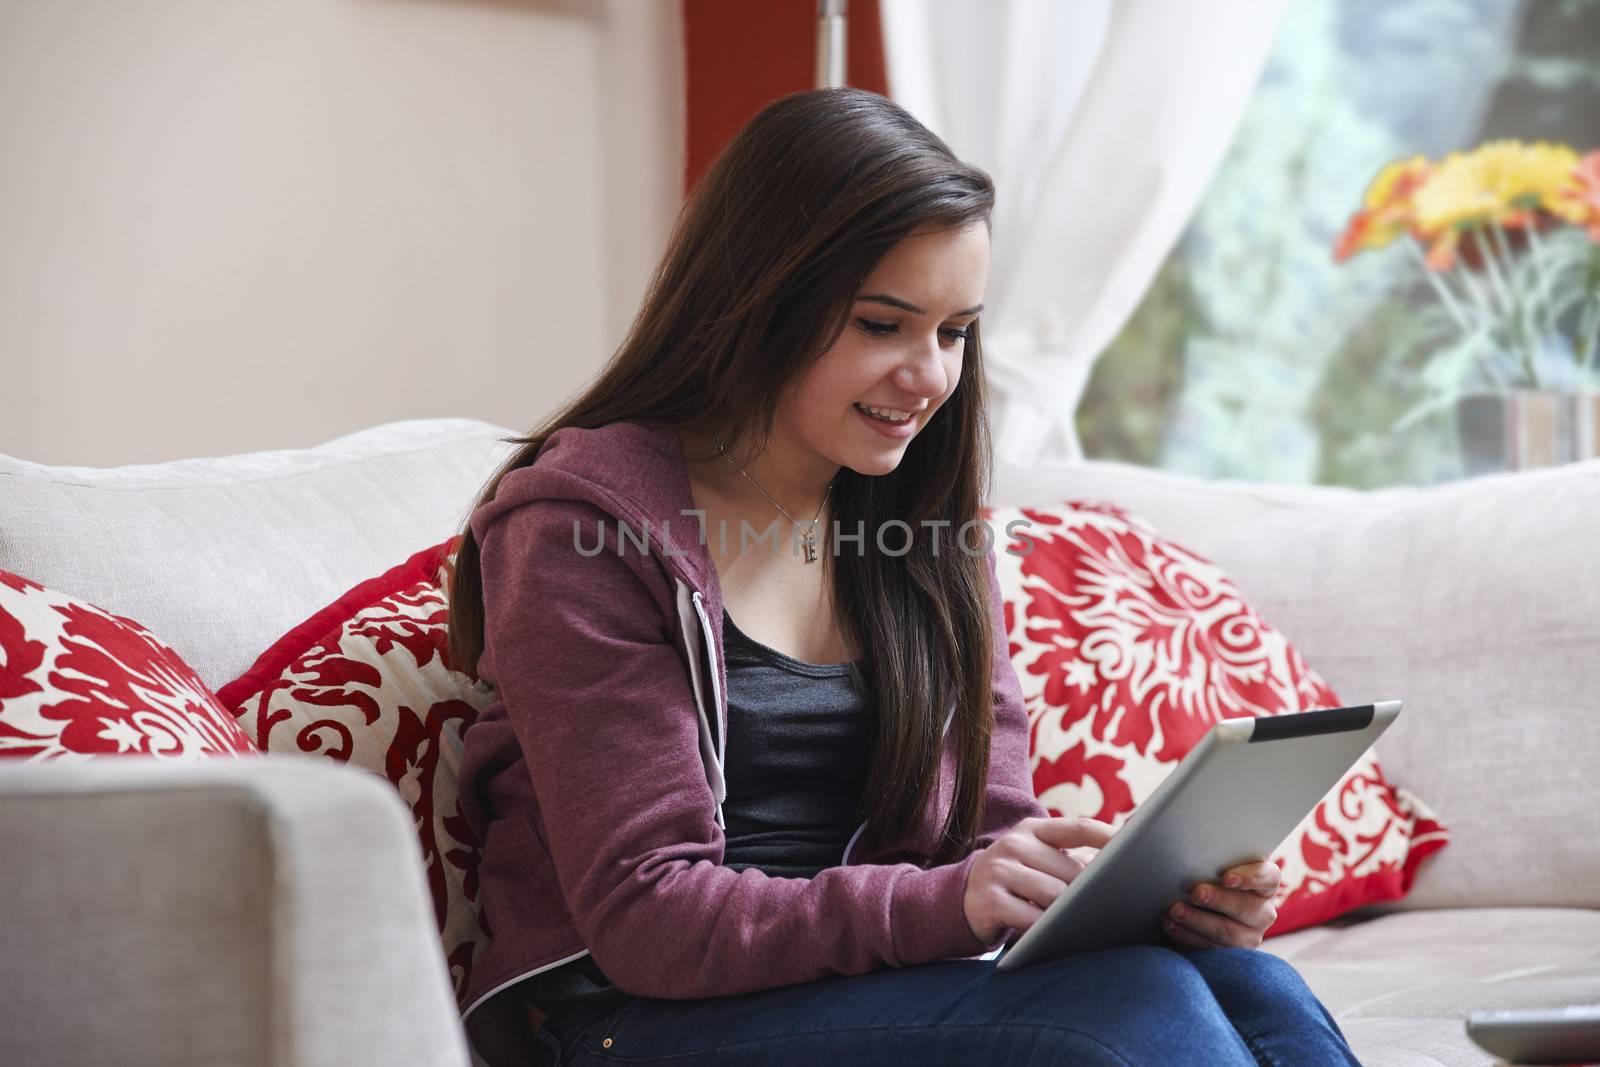 Teenage girl using a tablet pc while sitting at home